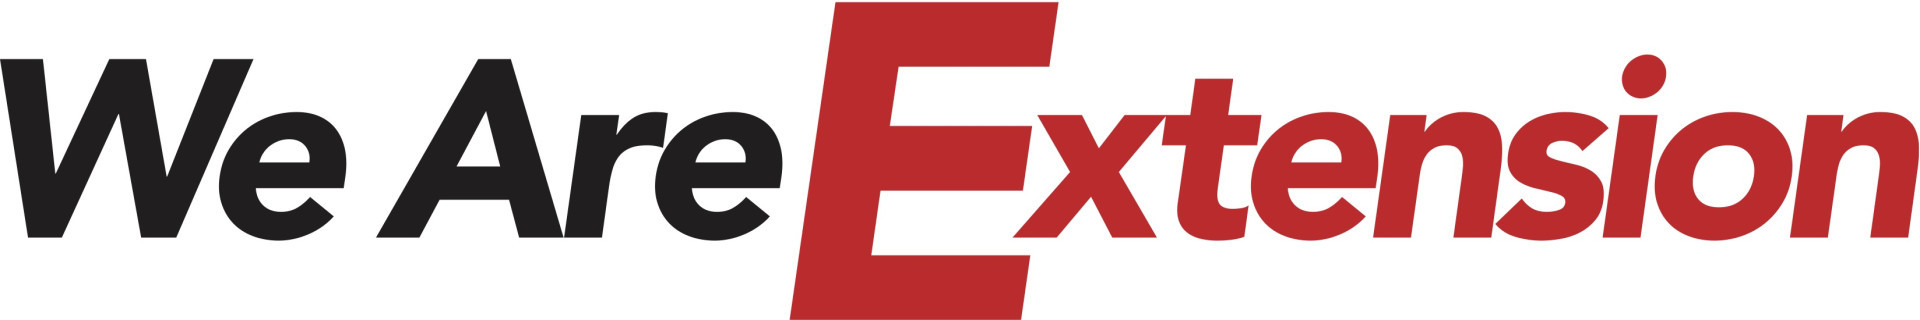 We are extension logo